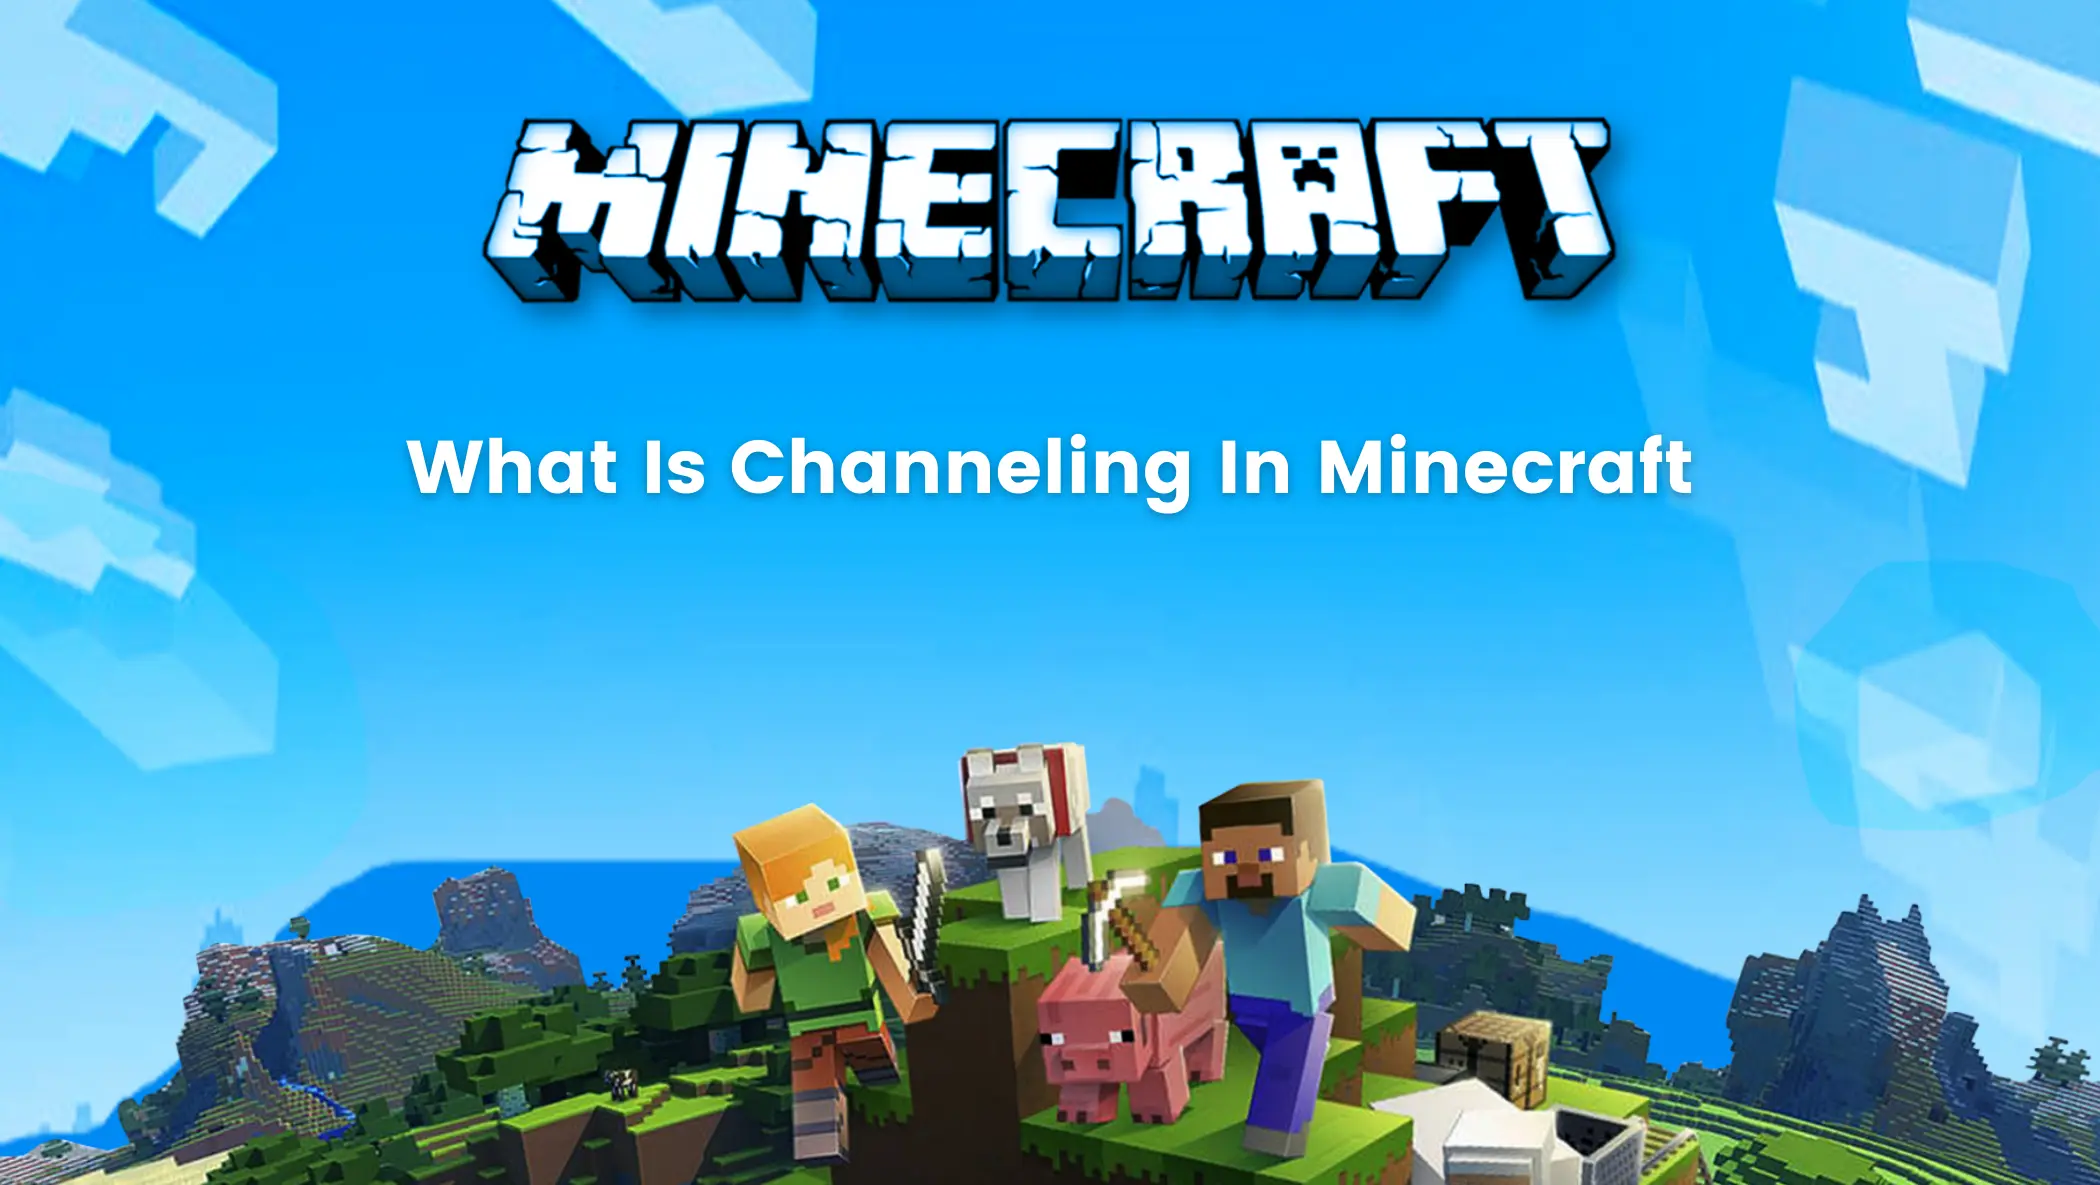 https://brightchamps.com/blog/wp-content/uploads/2022/04/What-Is-Channeling-In-Minecraft.webp